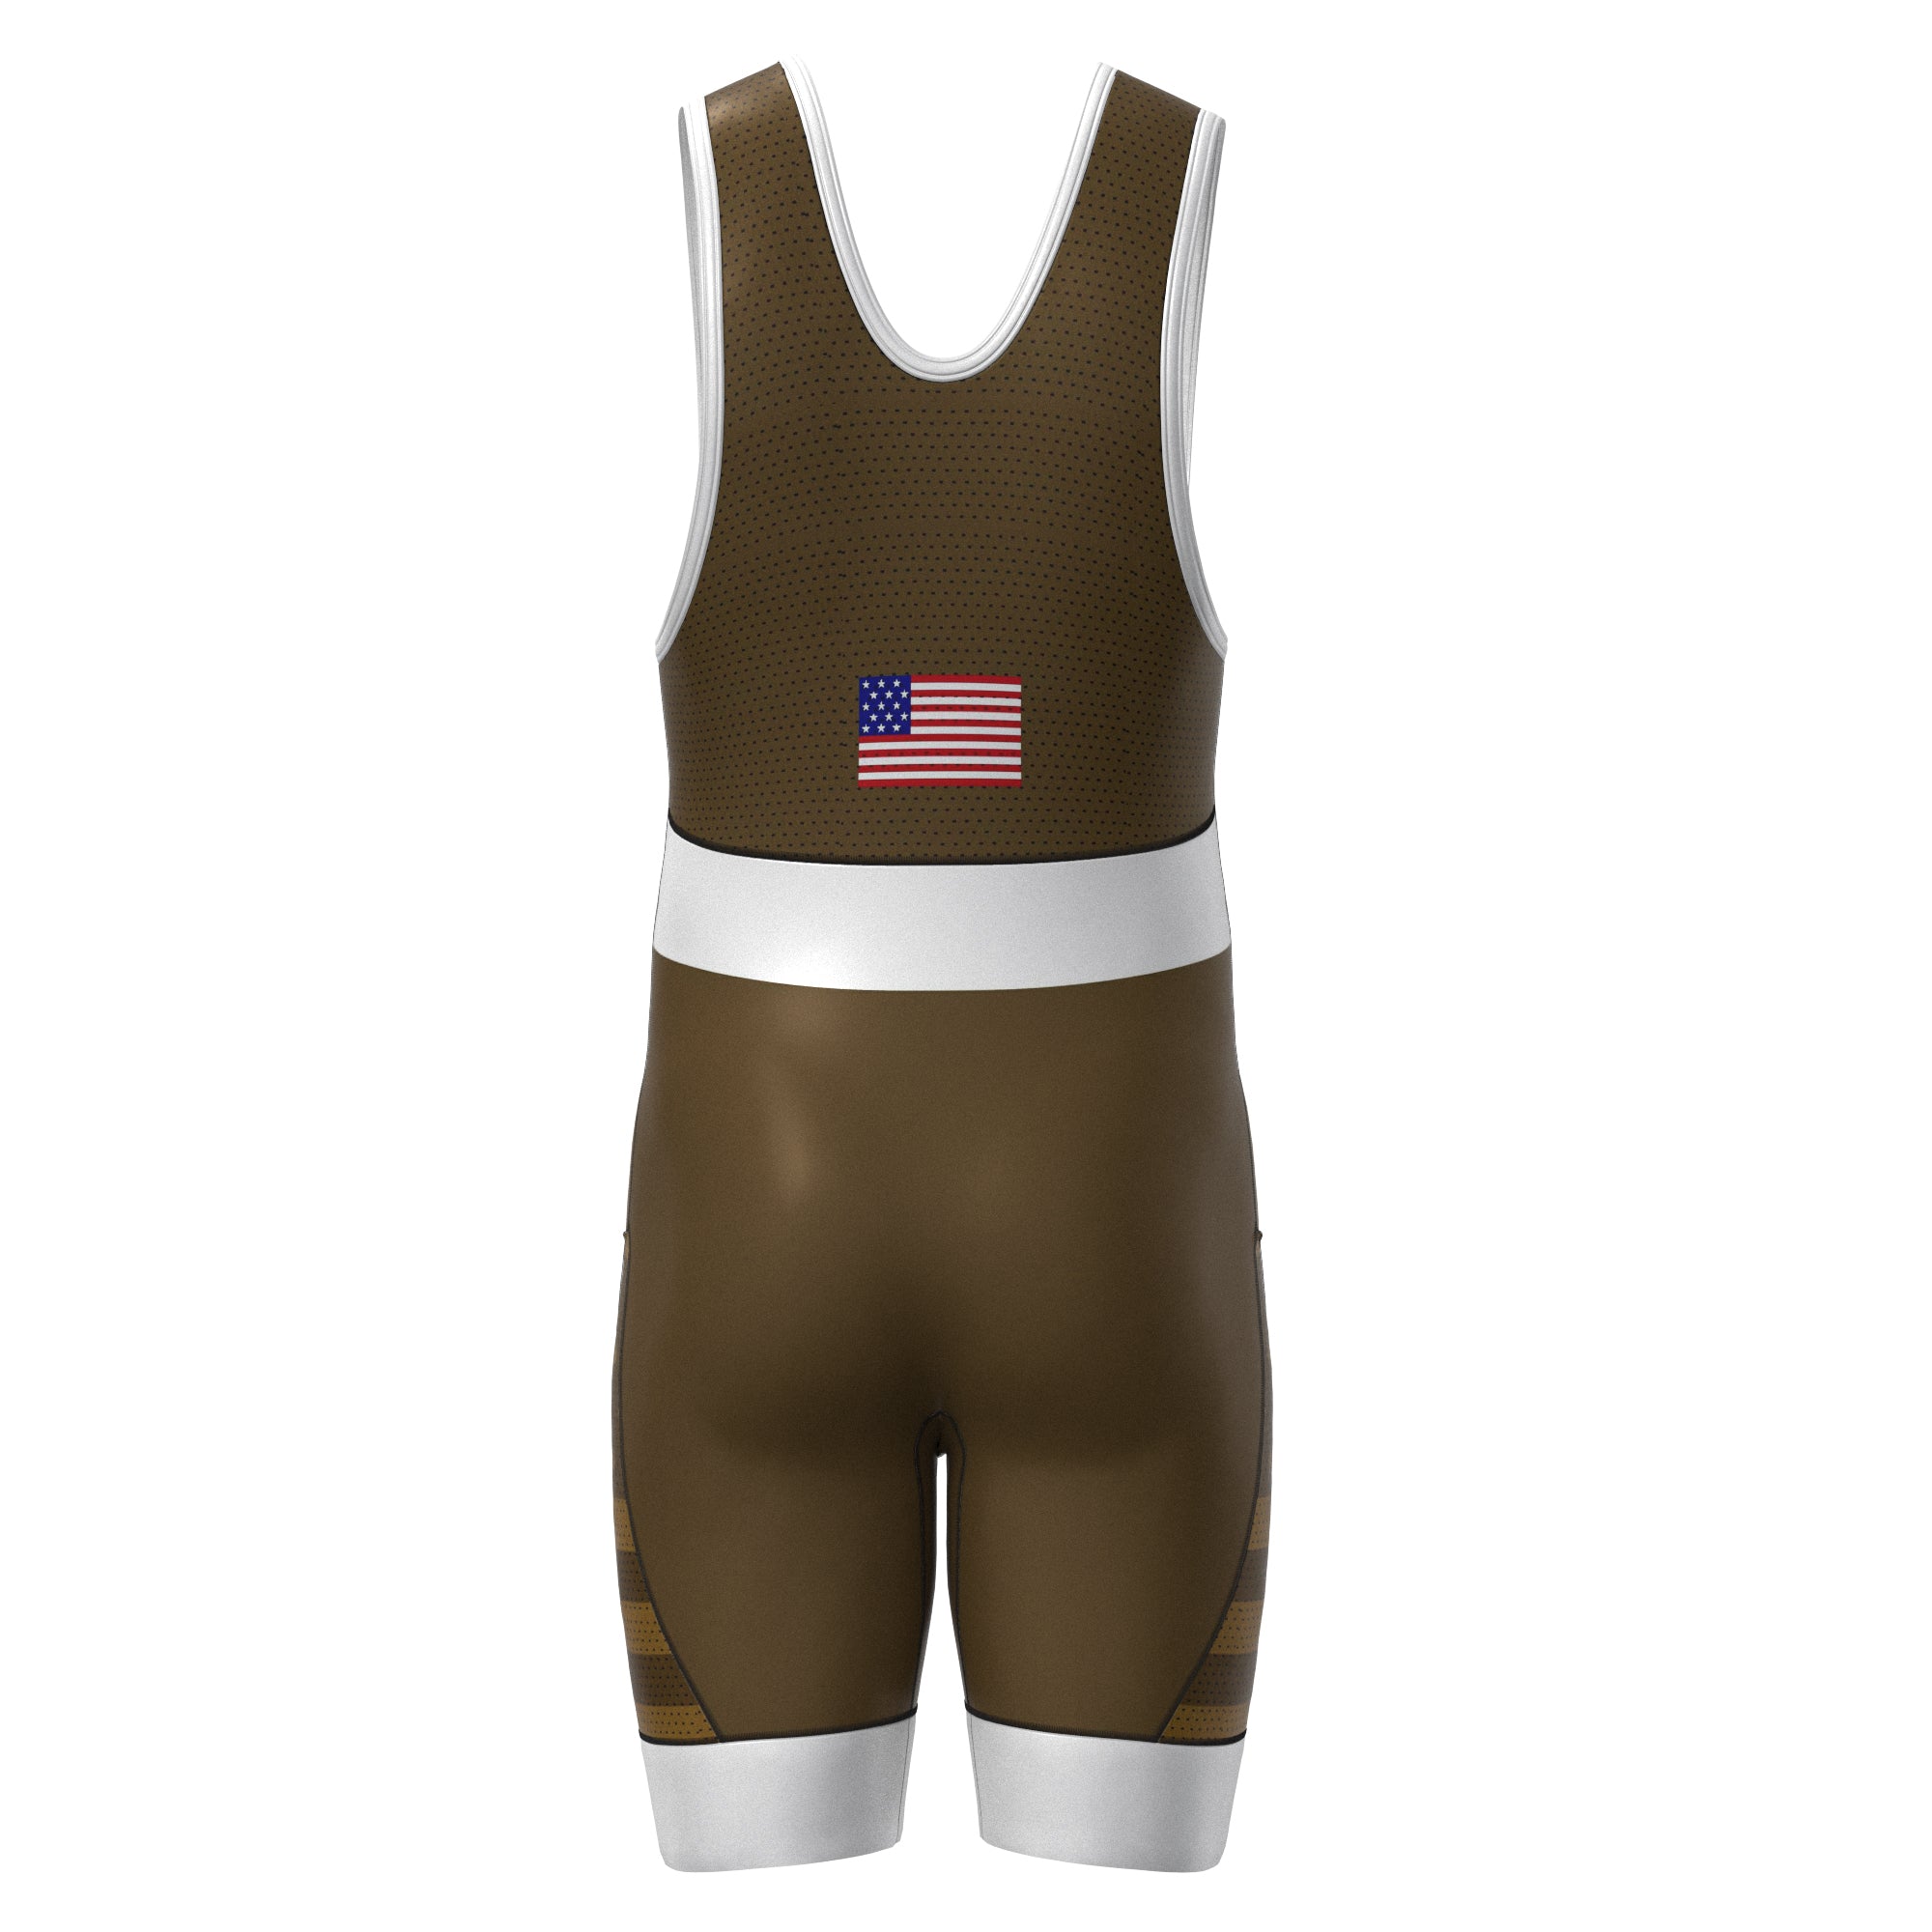 Xtreme Cut Olympic Gold Signature Singlet